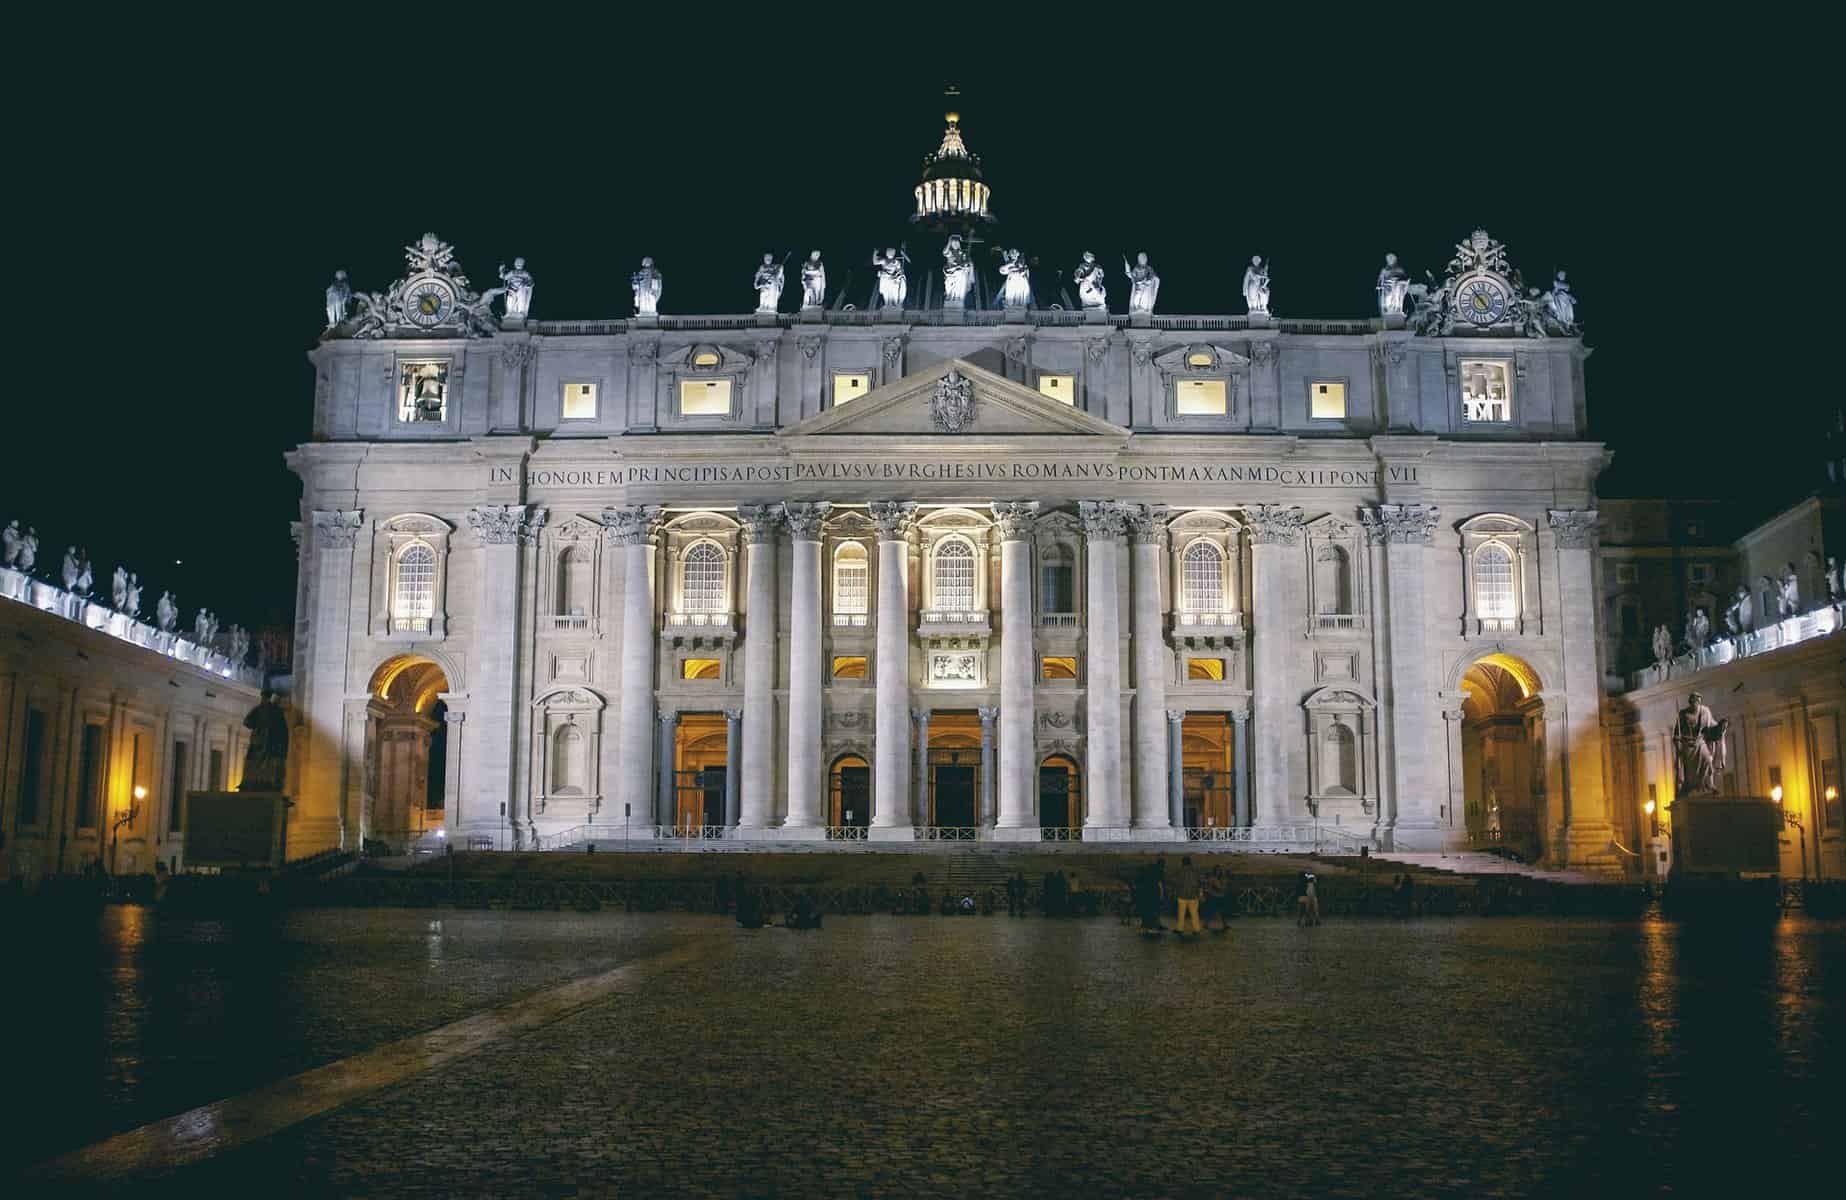 The Vatican is shown at night.